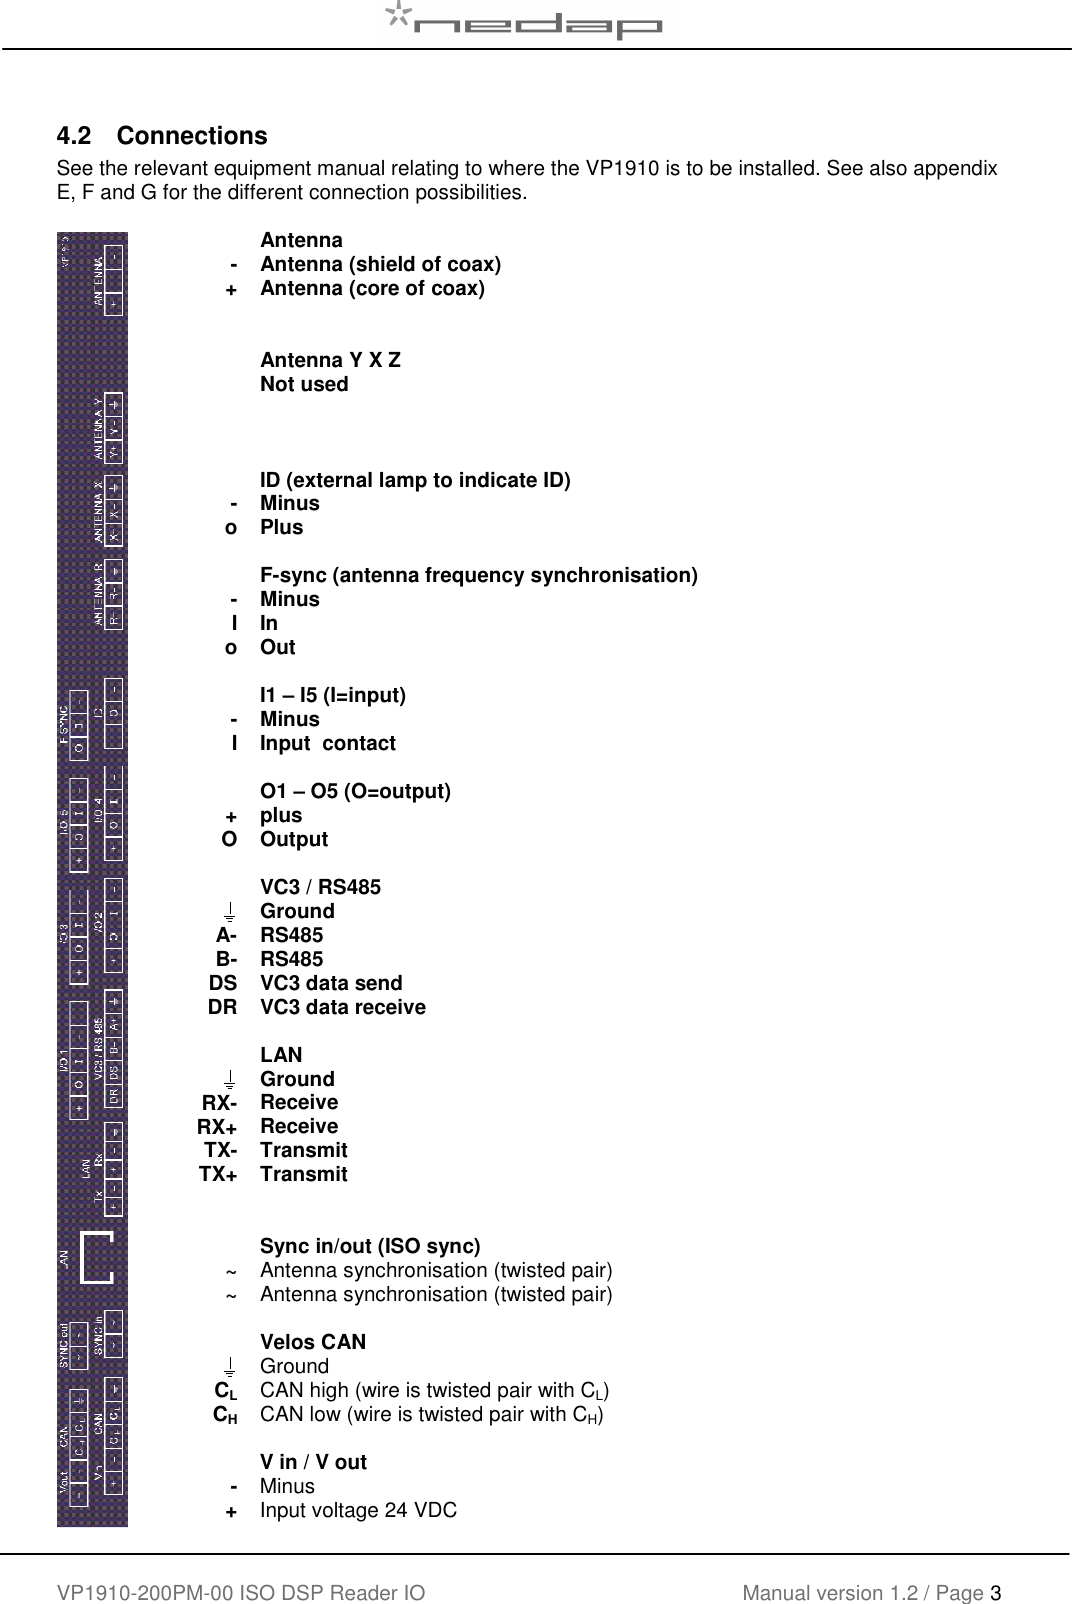    VP1910-200PM-00 ISO DSP Reader IO Manual version 1.2 / Page 3    4.2  Connections See the relevant equipment manual relating to where the VP1910 is to be installed. See also appendix E, F and G for the different connection possibilities.    - +         -  o   - I o   - I   + O    A- B- DS DR    RX- RX+ TX- TX+    ~ ~    CL CH   - + Antenna Antenna (shield of coax) Antenna (core of coax)   Antenna Y X Z Not used    ID (external lamp to indicate ID) Minus  Plus  F-sync (antenna frequency synchronisation) Minus  In Out  I1 – I5 (I=input) Minus Input  contact  O1 – O5 (O=output) plus Output  VC3 / RS485 Ground RS485 RS485 VC3 data send VC3 data receive  LAN Ground Receive Receive Transmit Transmit   Sync in/out (ISO sync) Antenna synchronisation (twisted pair) Antenna synchronisation (twisted pair)  Velos CAN Ground CAN high (wire is twisted pair with CL) CAN low (wire is twisted pair with CH)  V in / V out  Minus Input voltage 24 VDC 